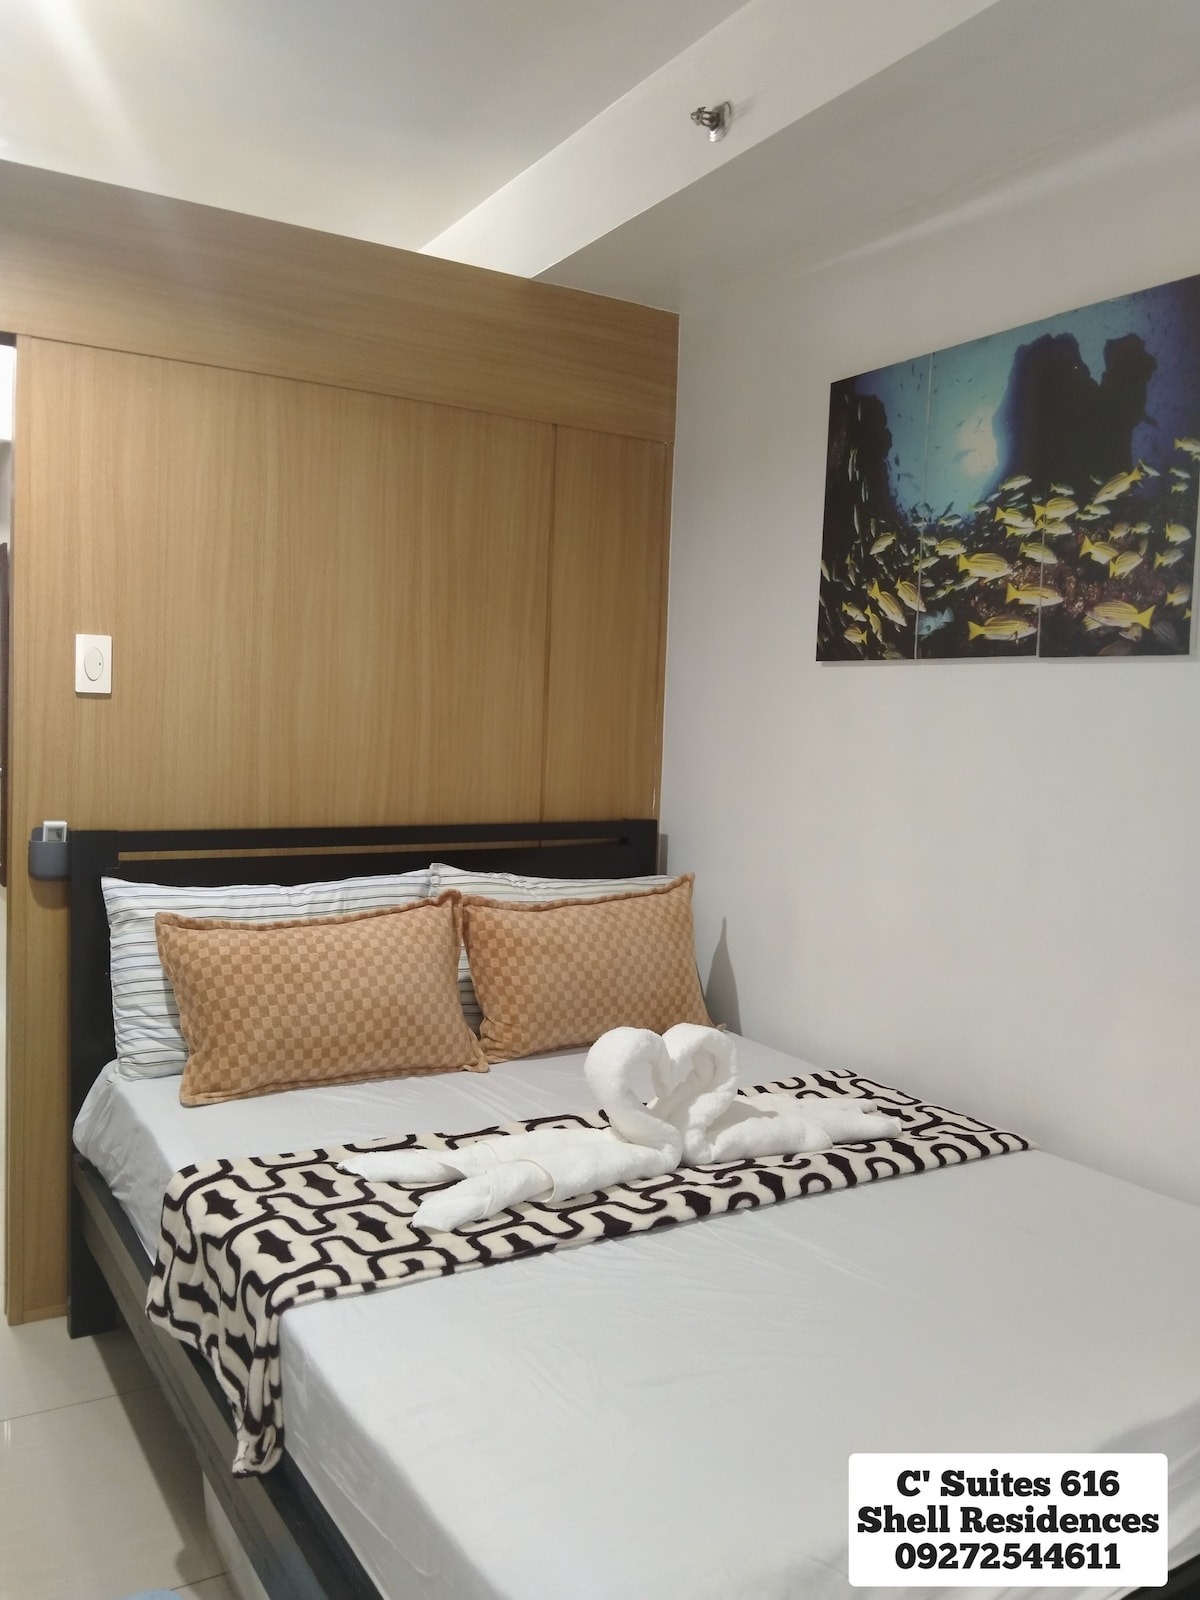 C Suites 616C Shell Residences